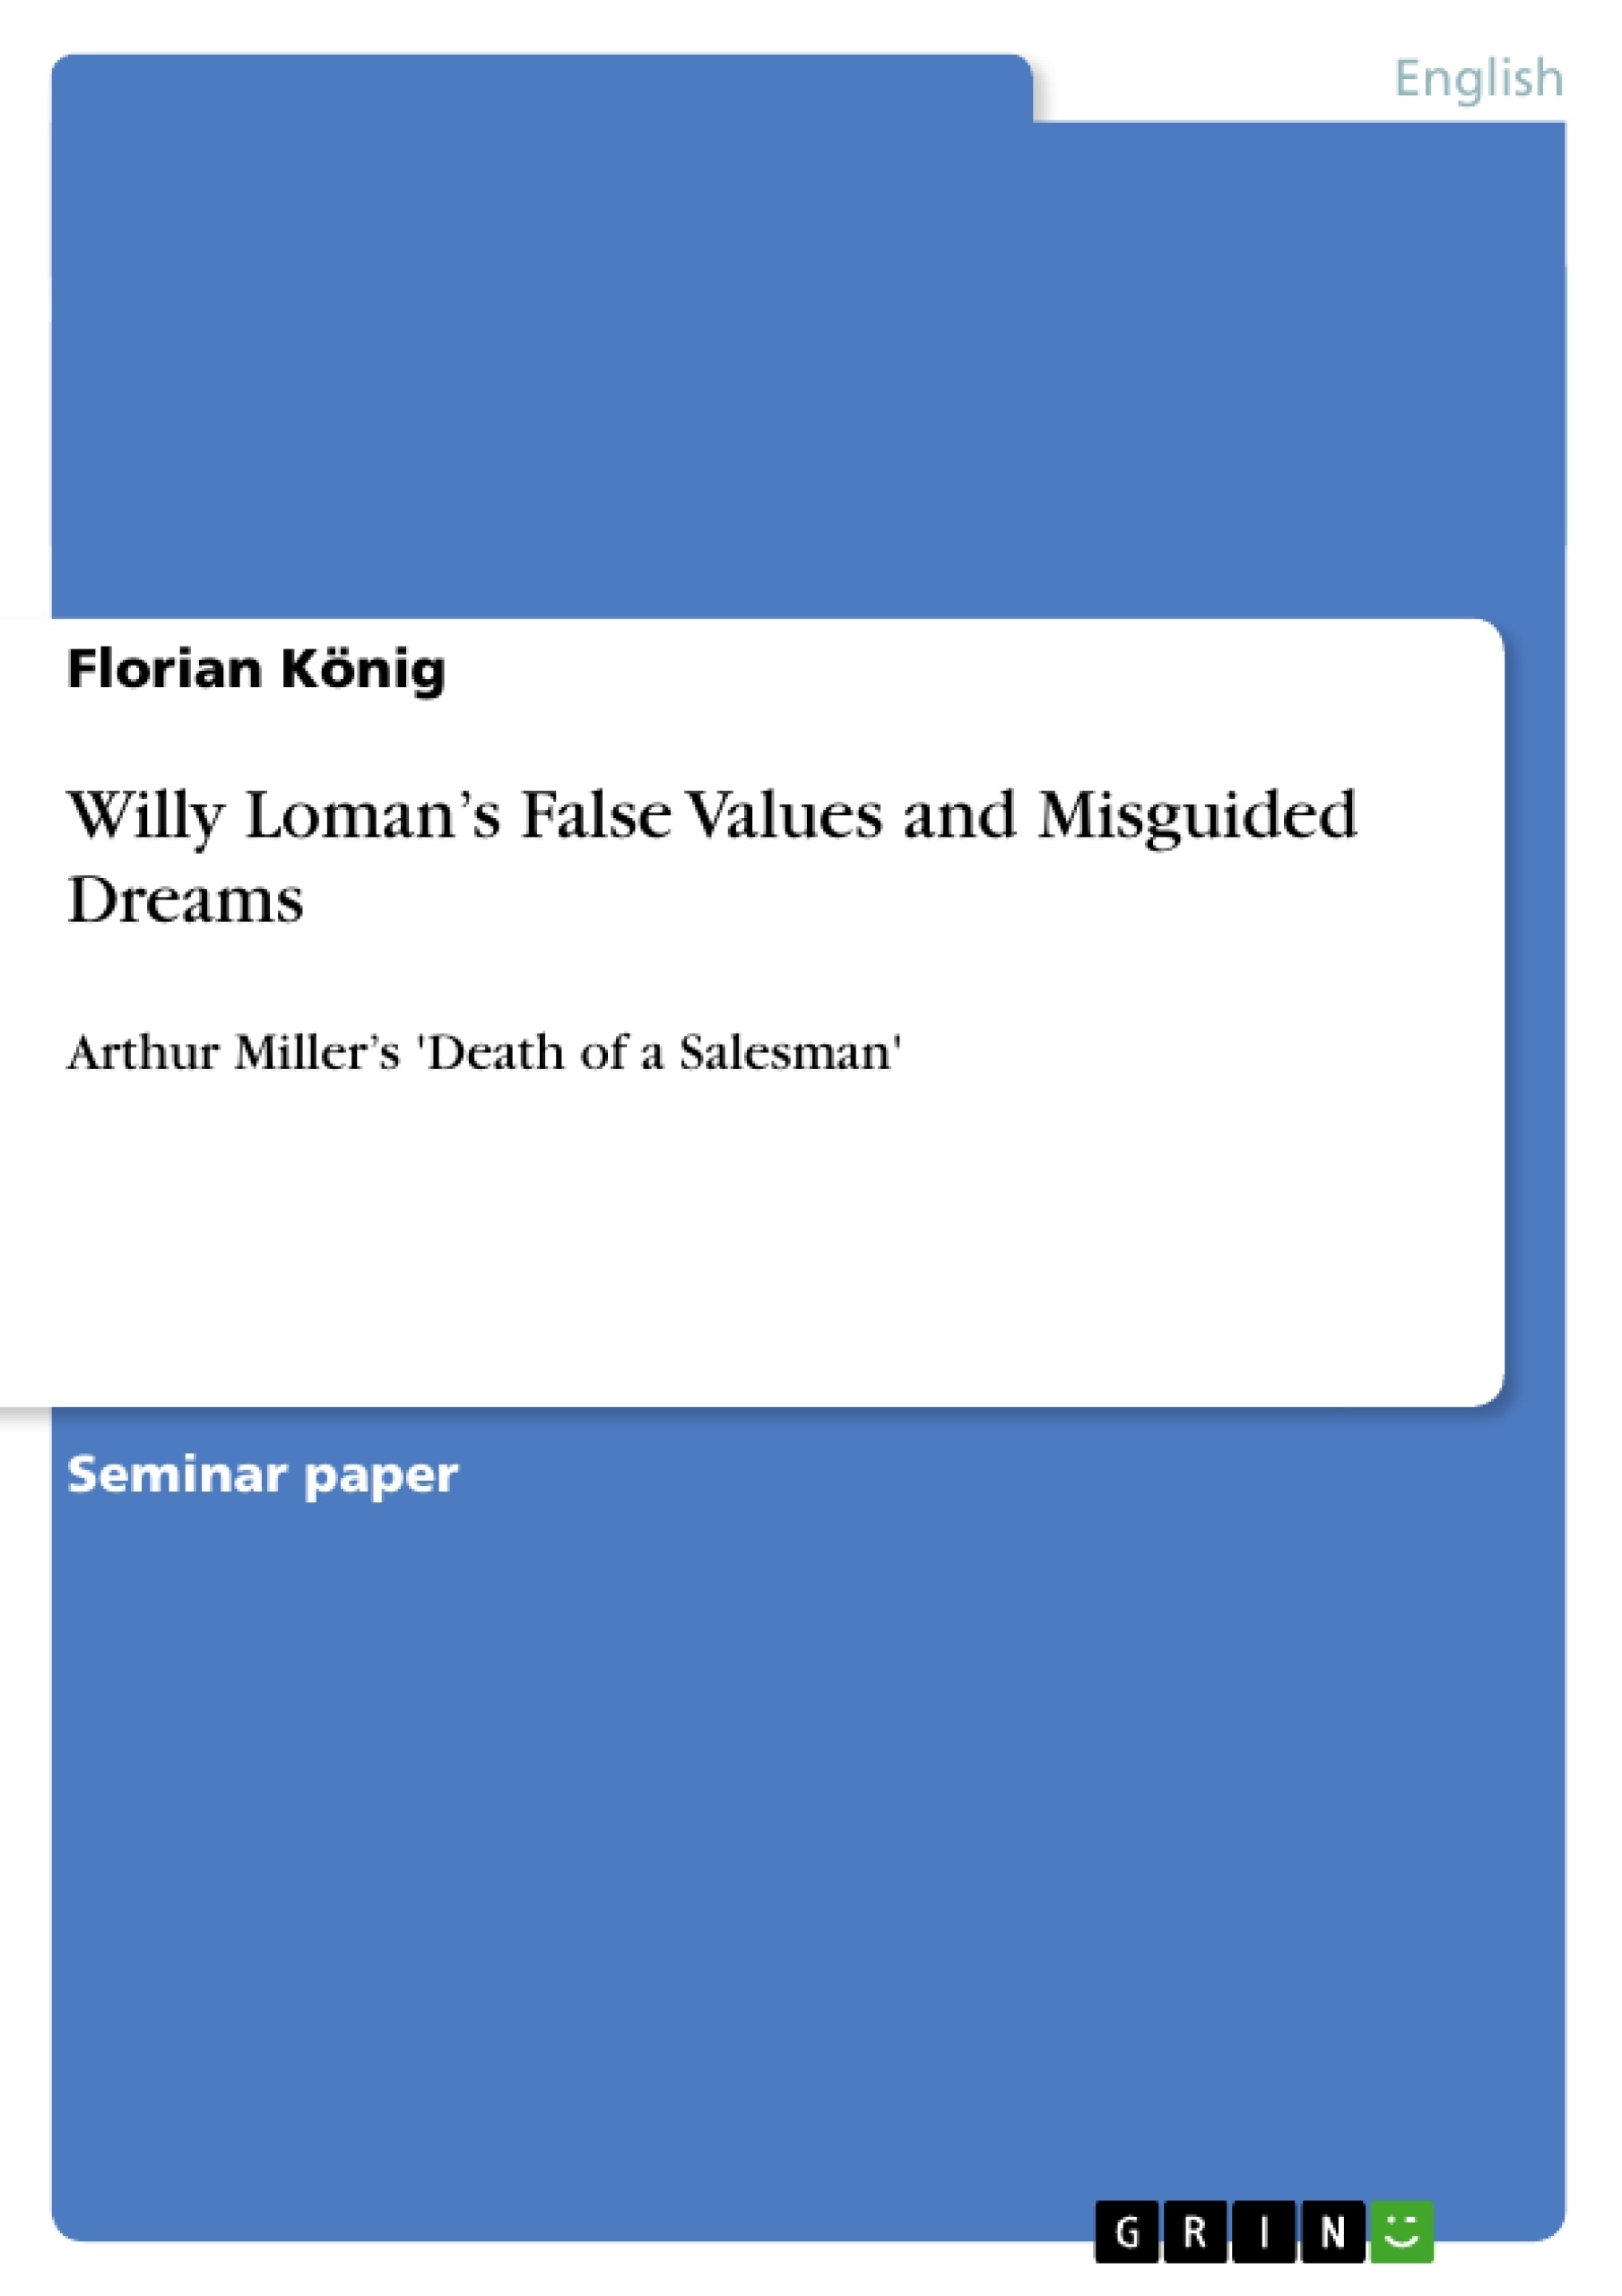 Título: Willy Loman’s False Values and Misguided Dreams